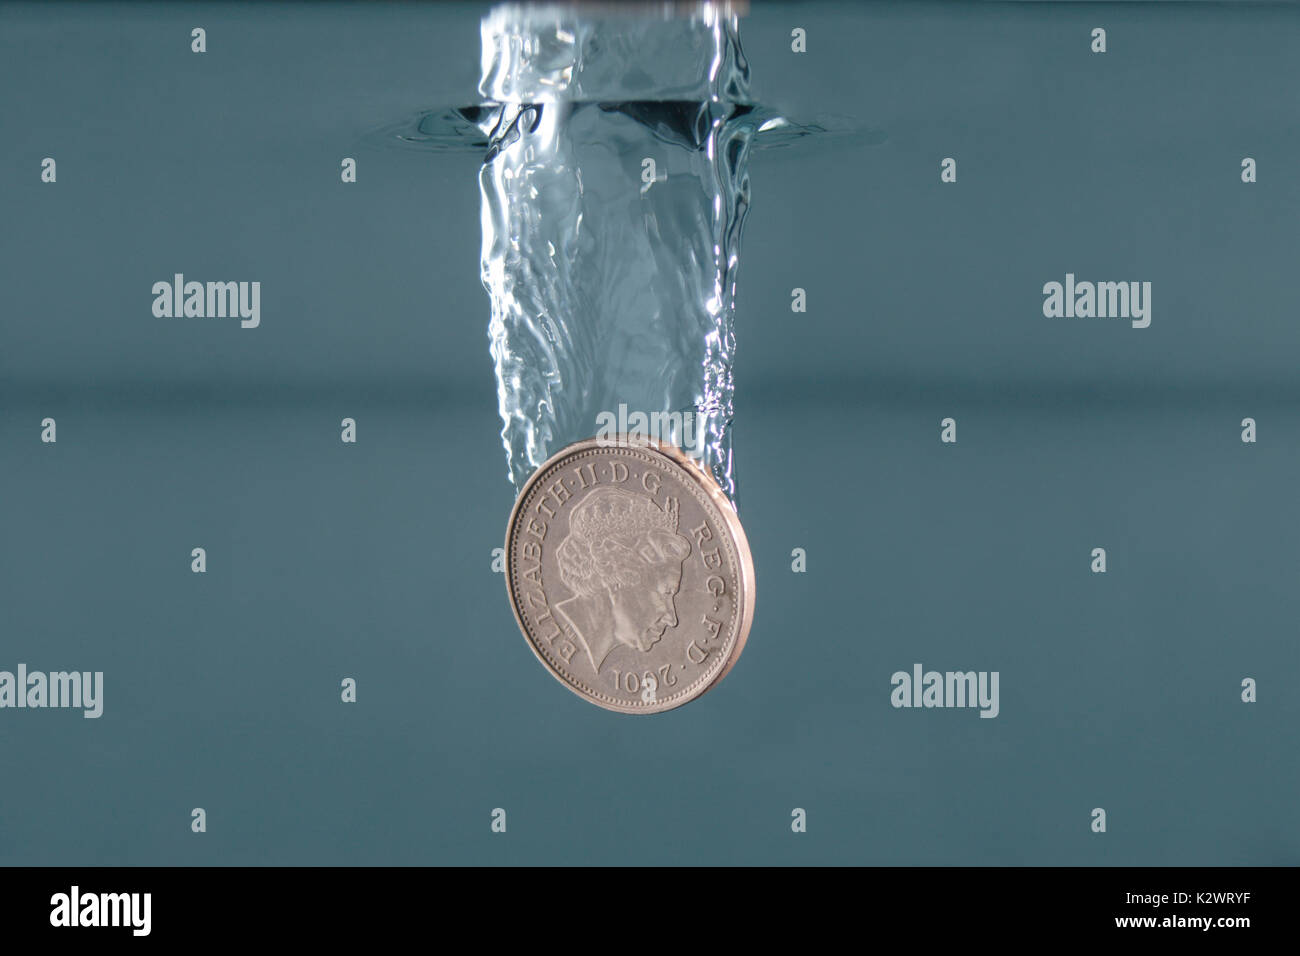 British money falling into water, photographed from below the waterline. Stock Photo